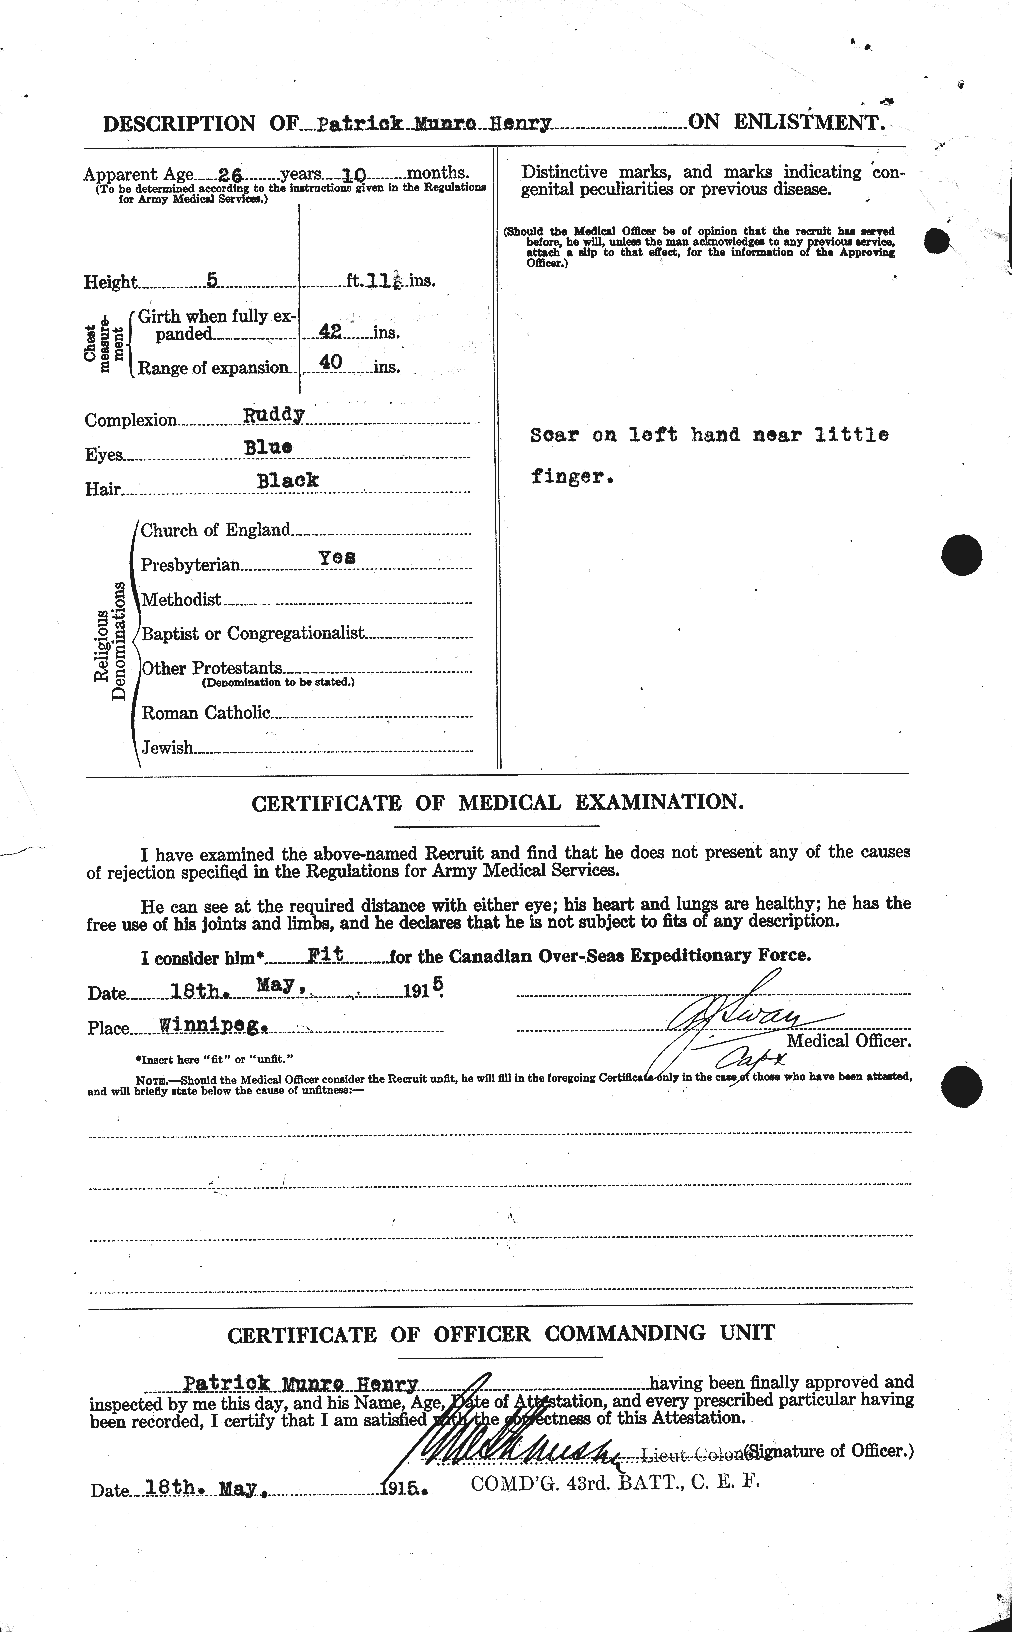 Personnel Records of the First World War - CEF 387679b